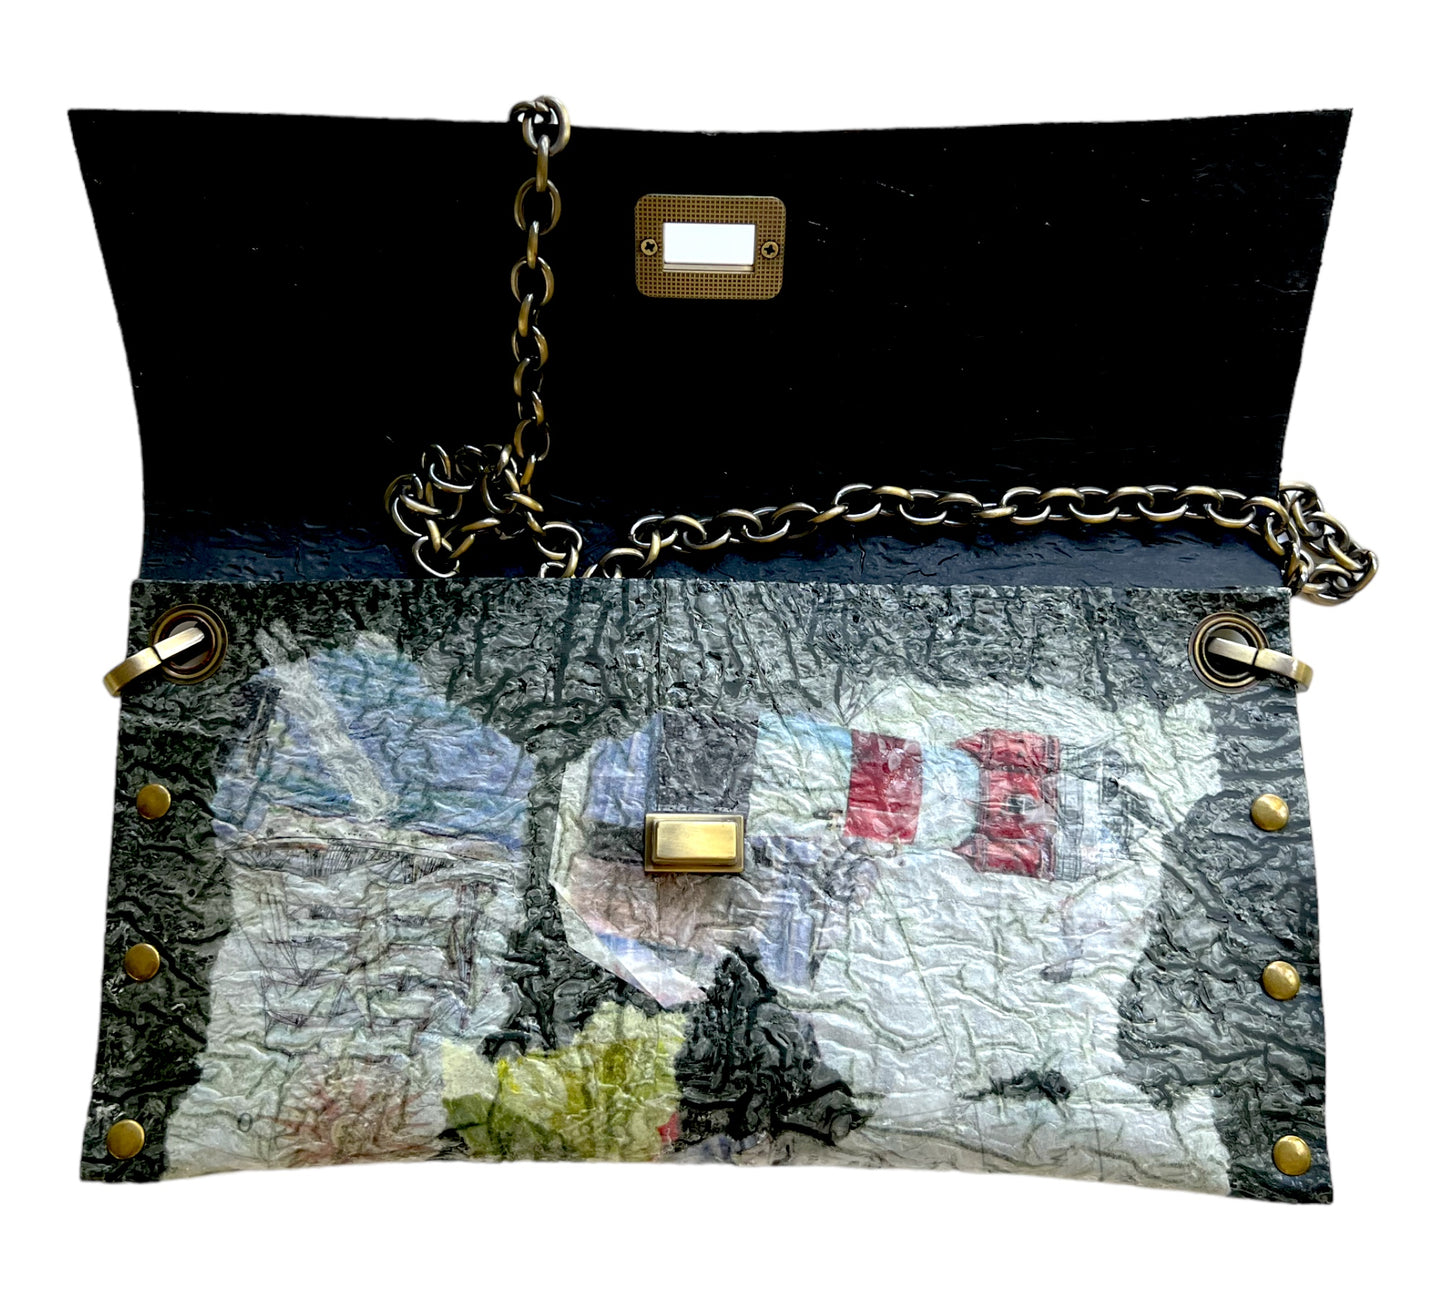 Black Recycled Handbag Eco-friendly Upcycled and Ethically Crafted